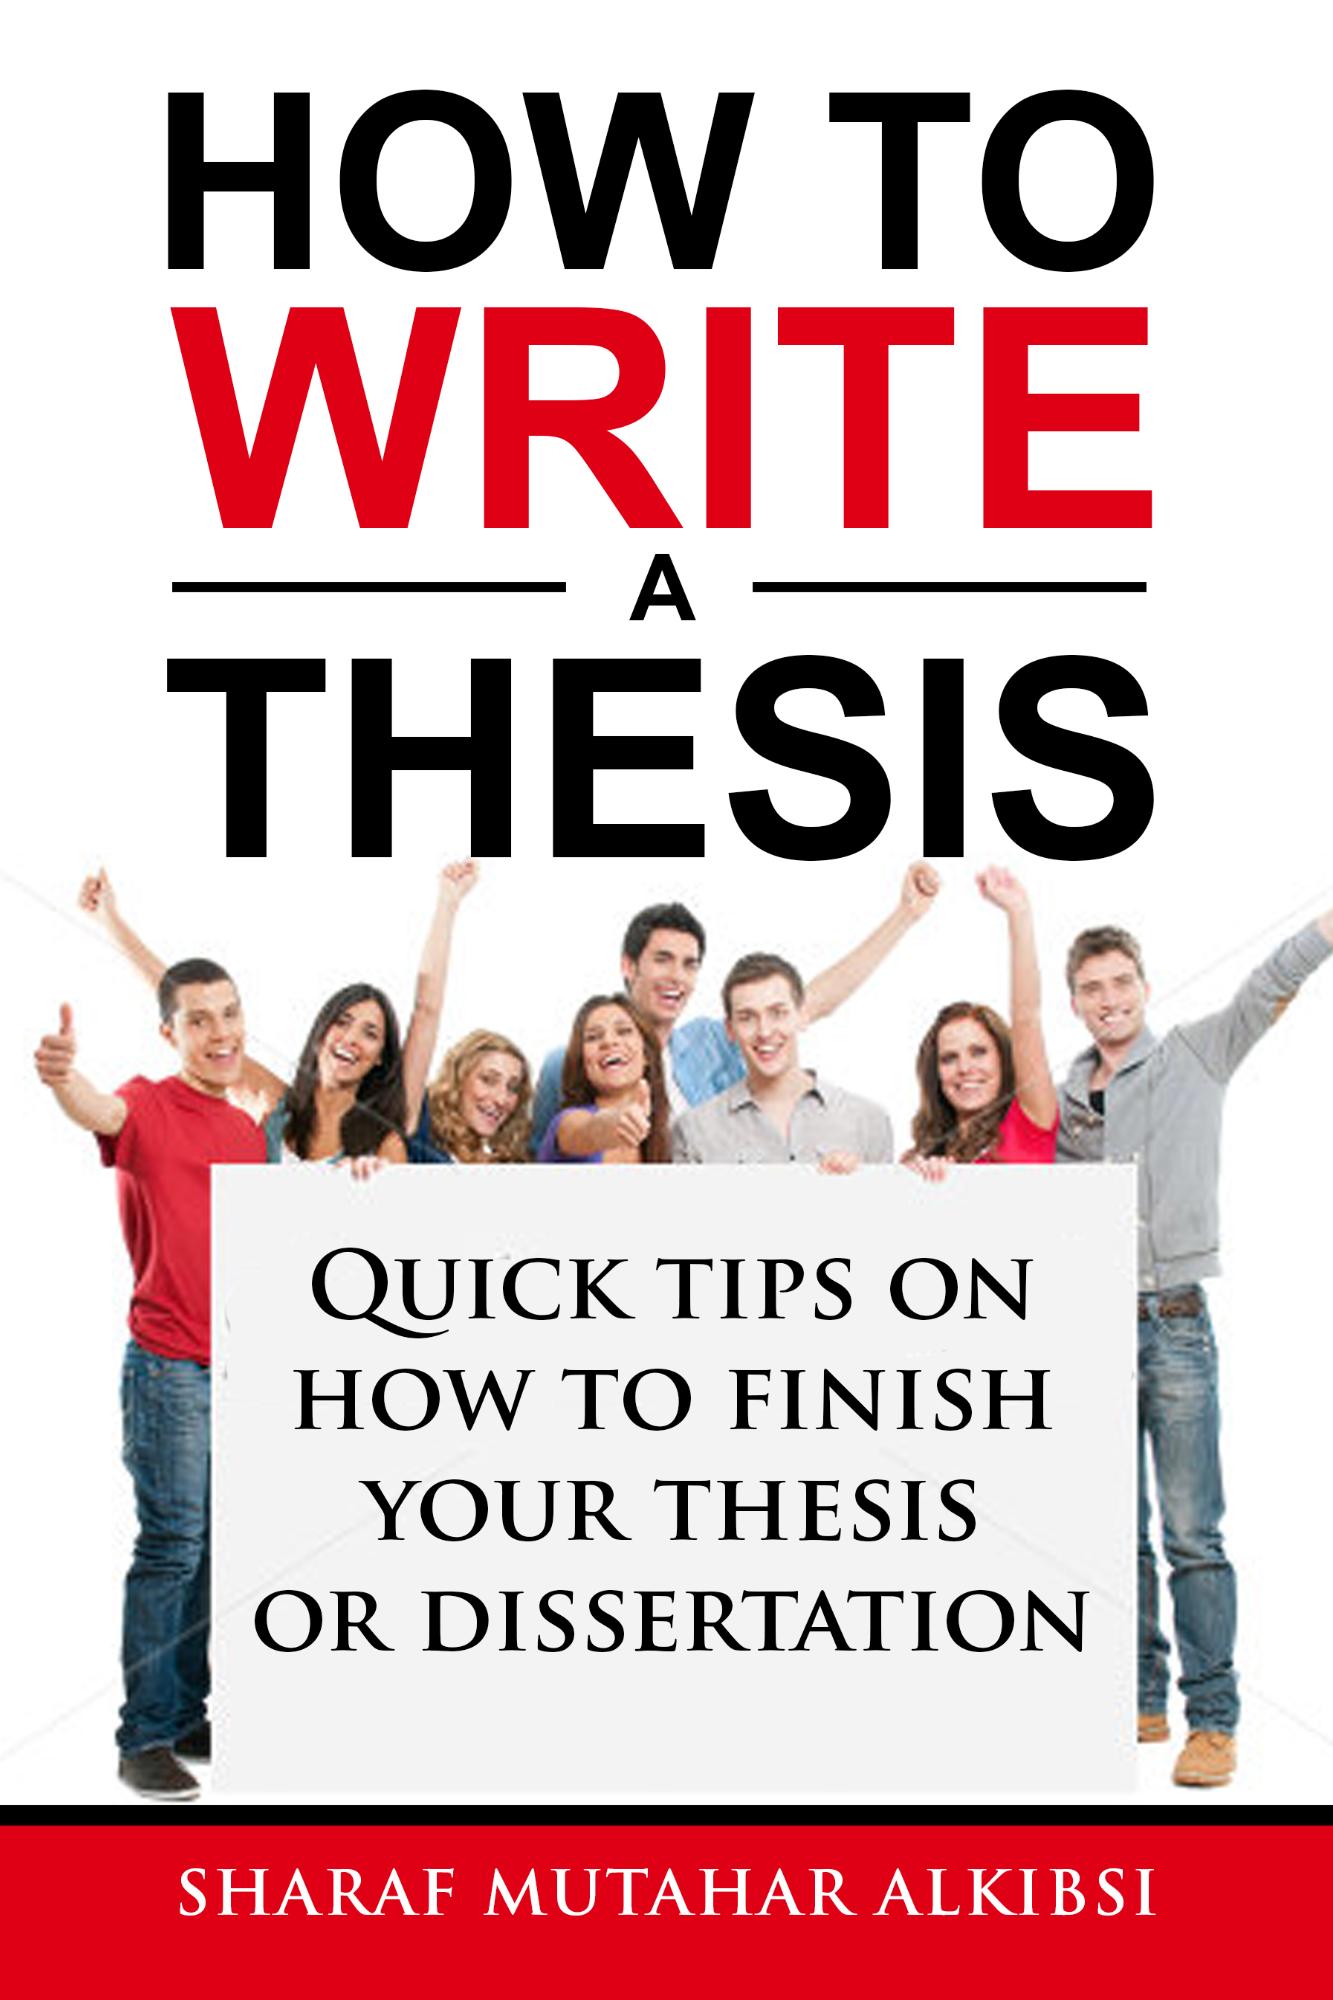 publishing a master's thesis a guide for novice authors